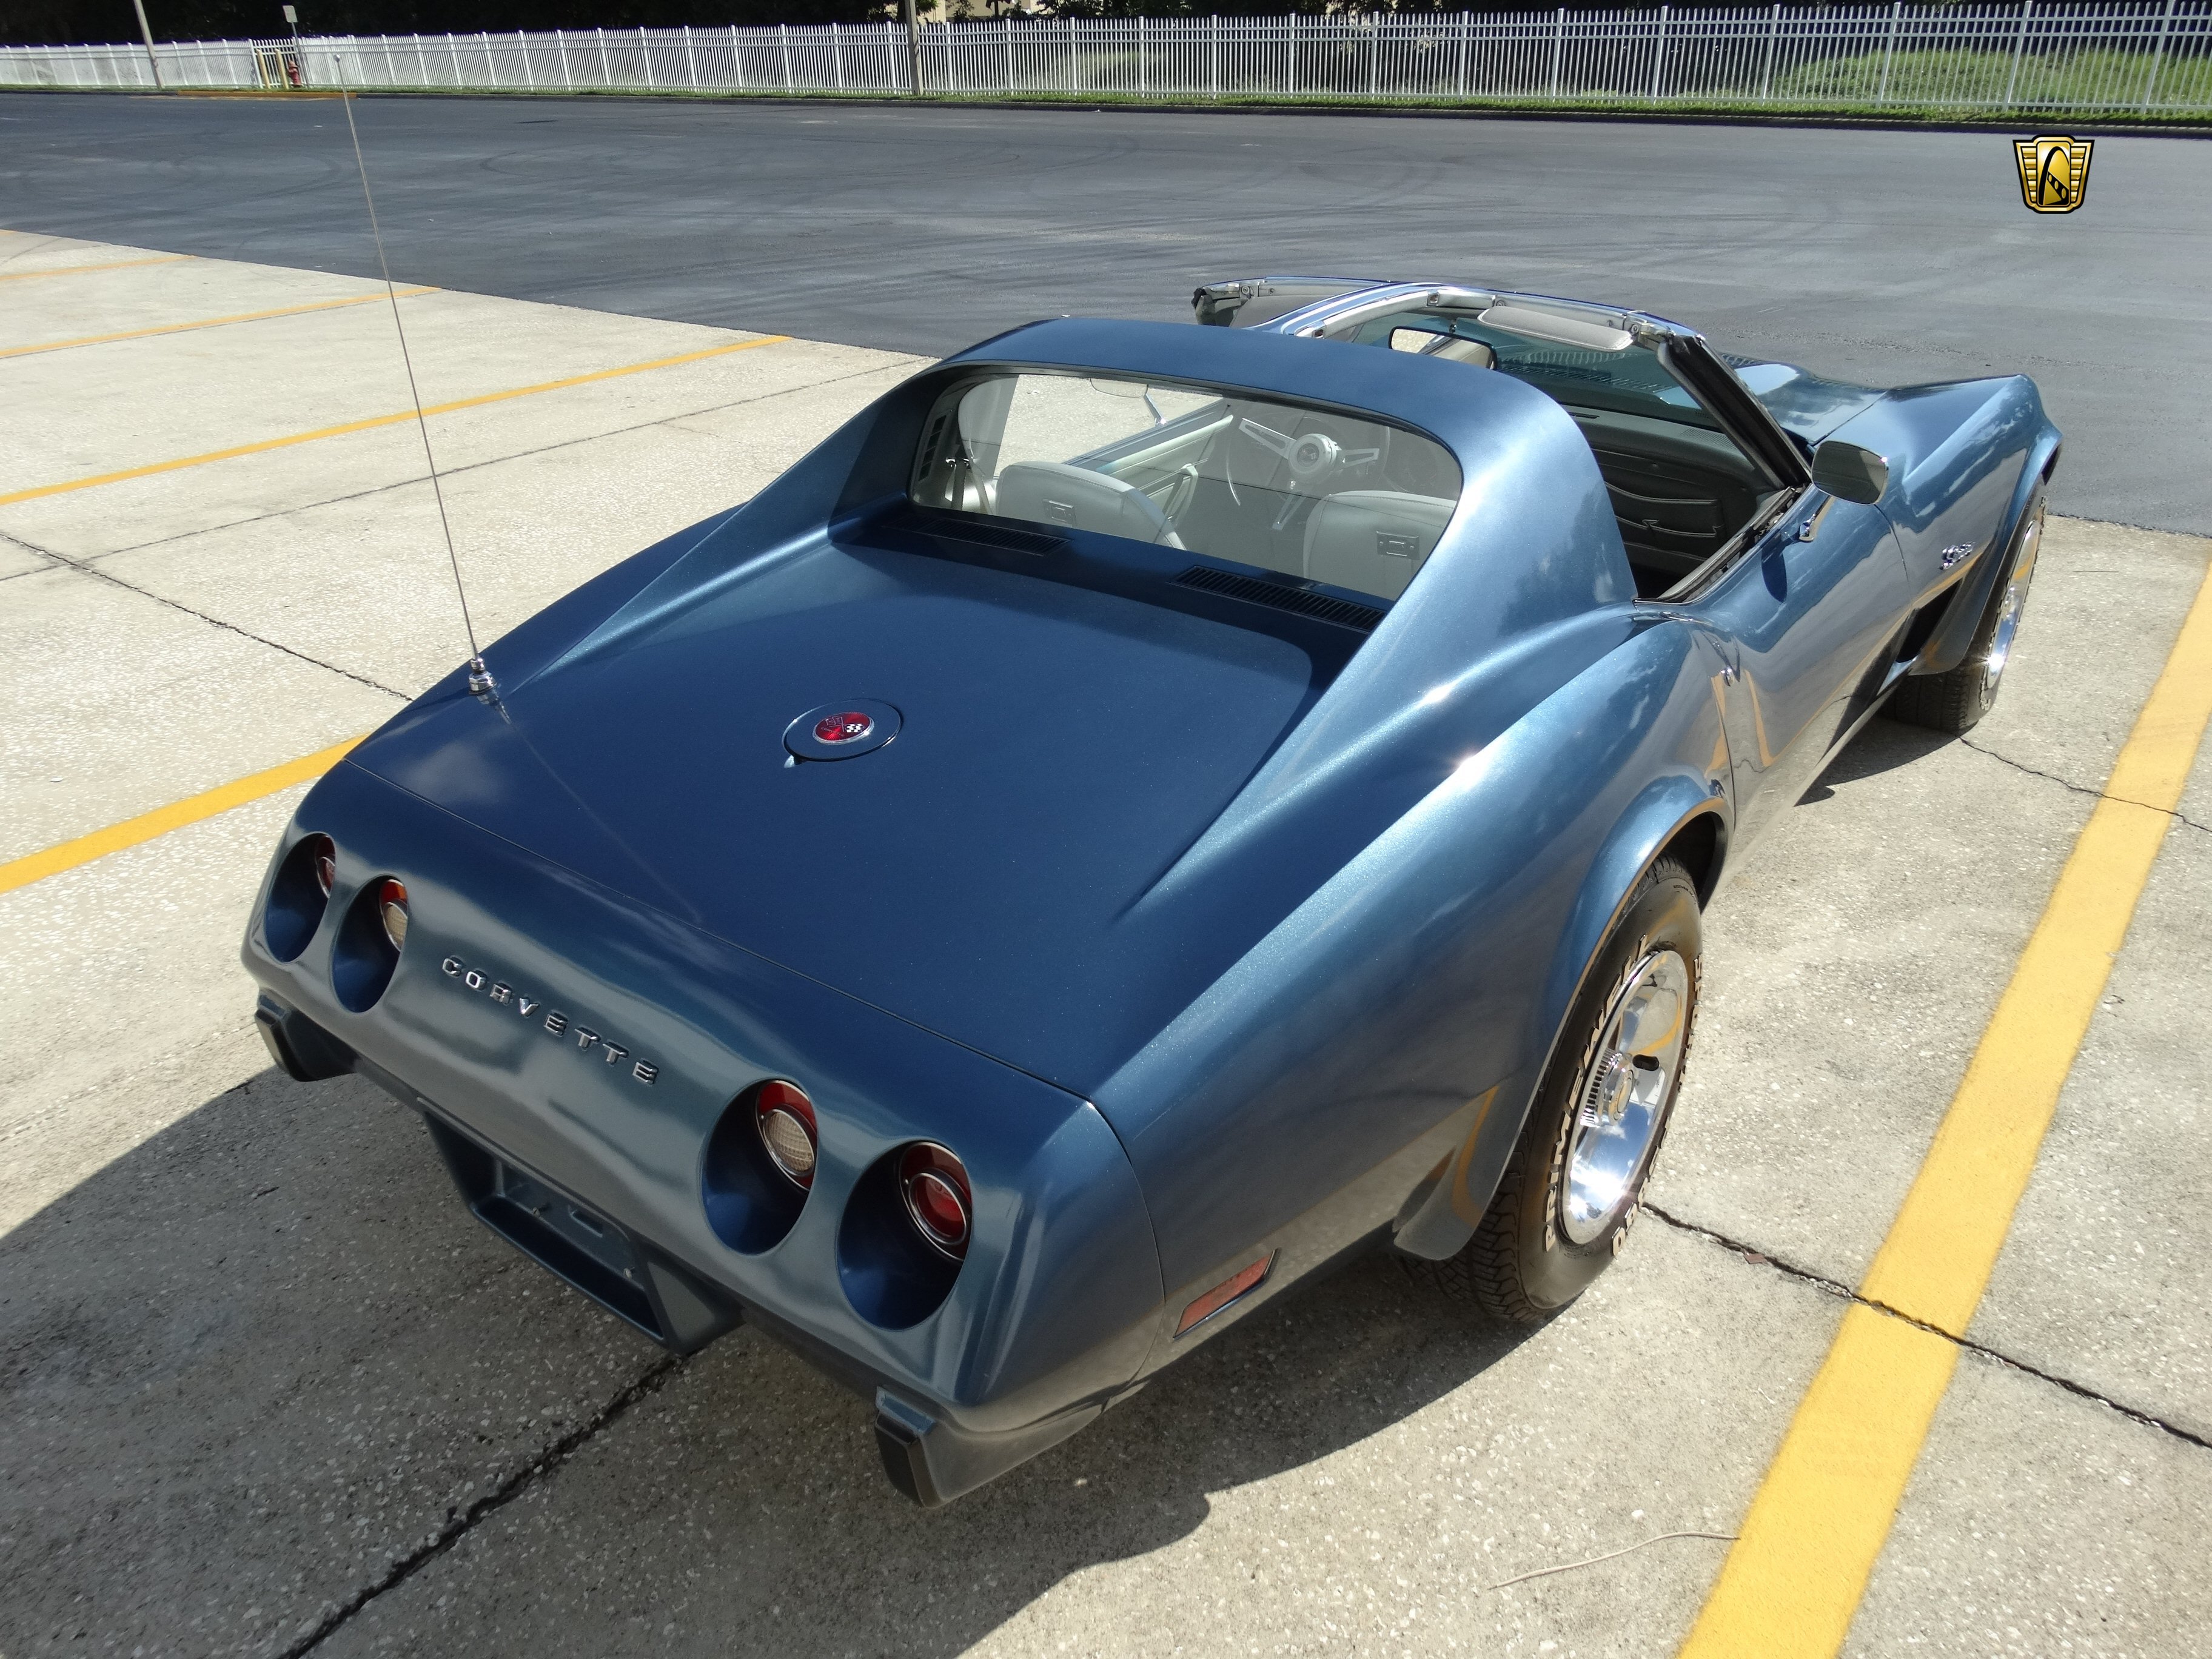 1975, Chevrolet, Classic, Corvette, Muscle, Old, Original, Ray, Sting, Usa, Blue Wallpaper